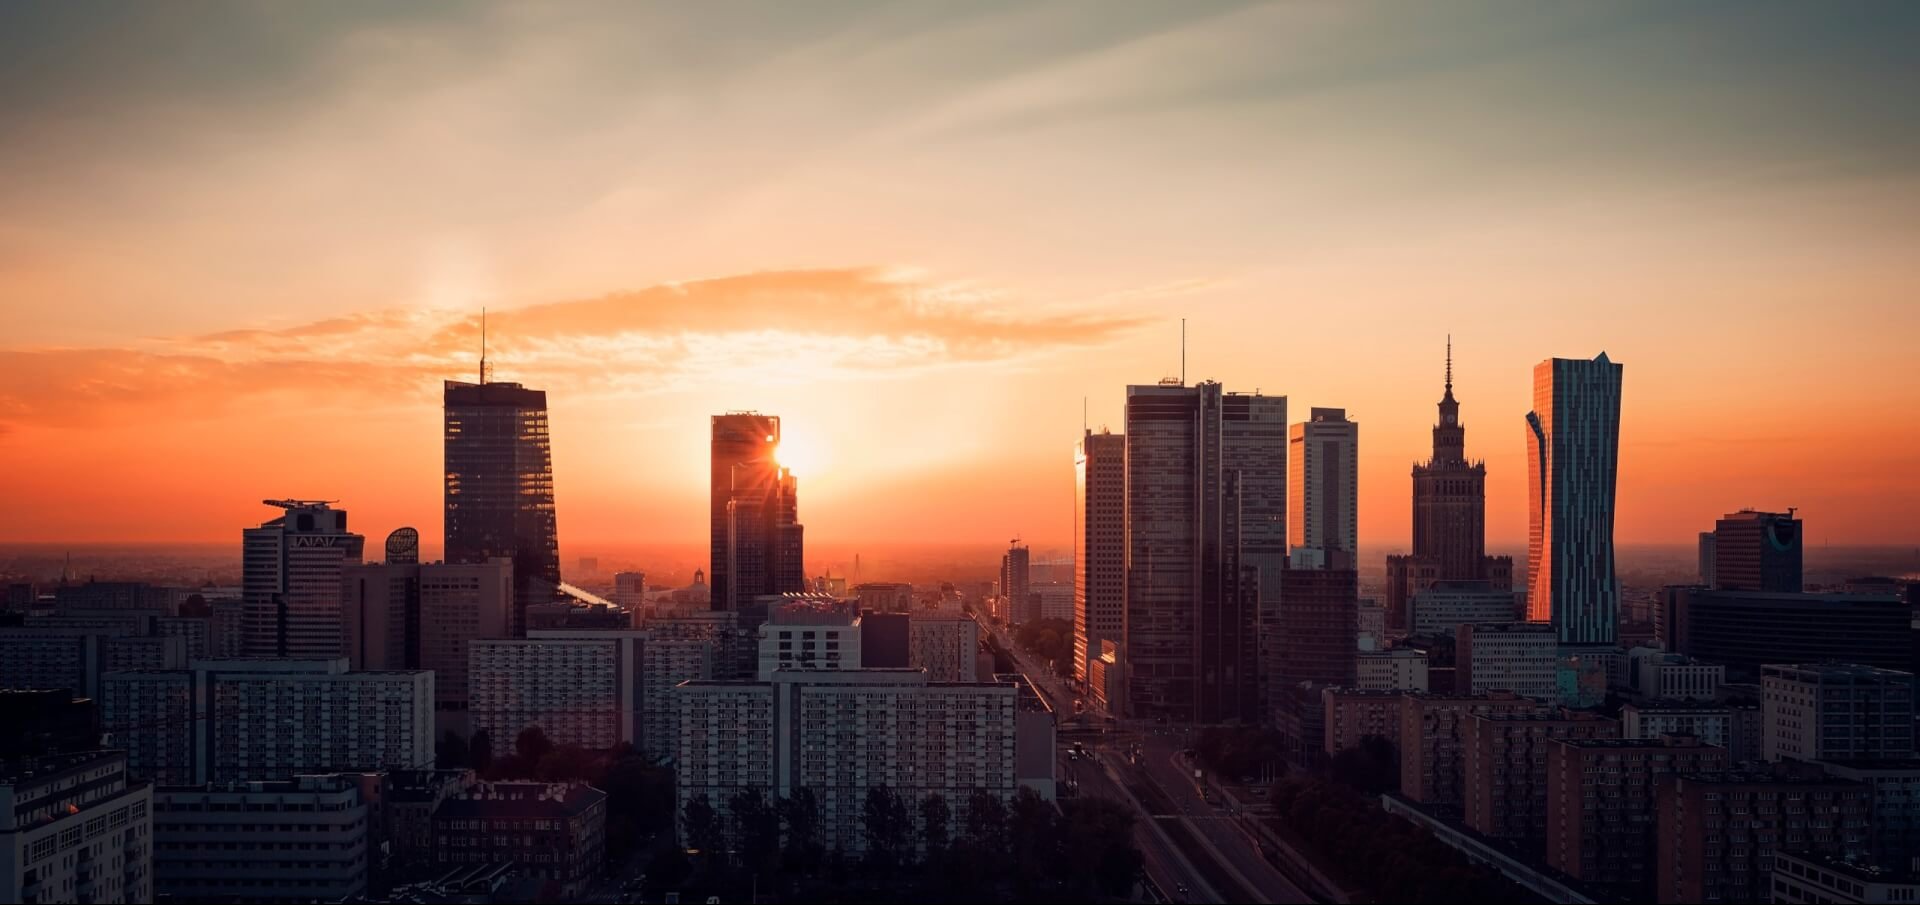 Warsaw’s investment potential is growing. What will the capital’s future look like? 